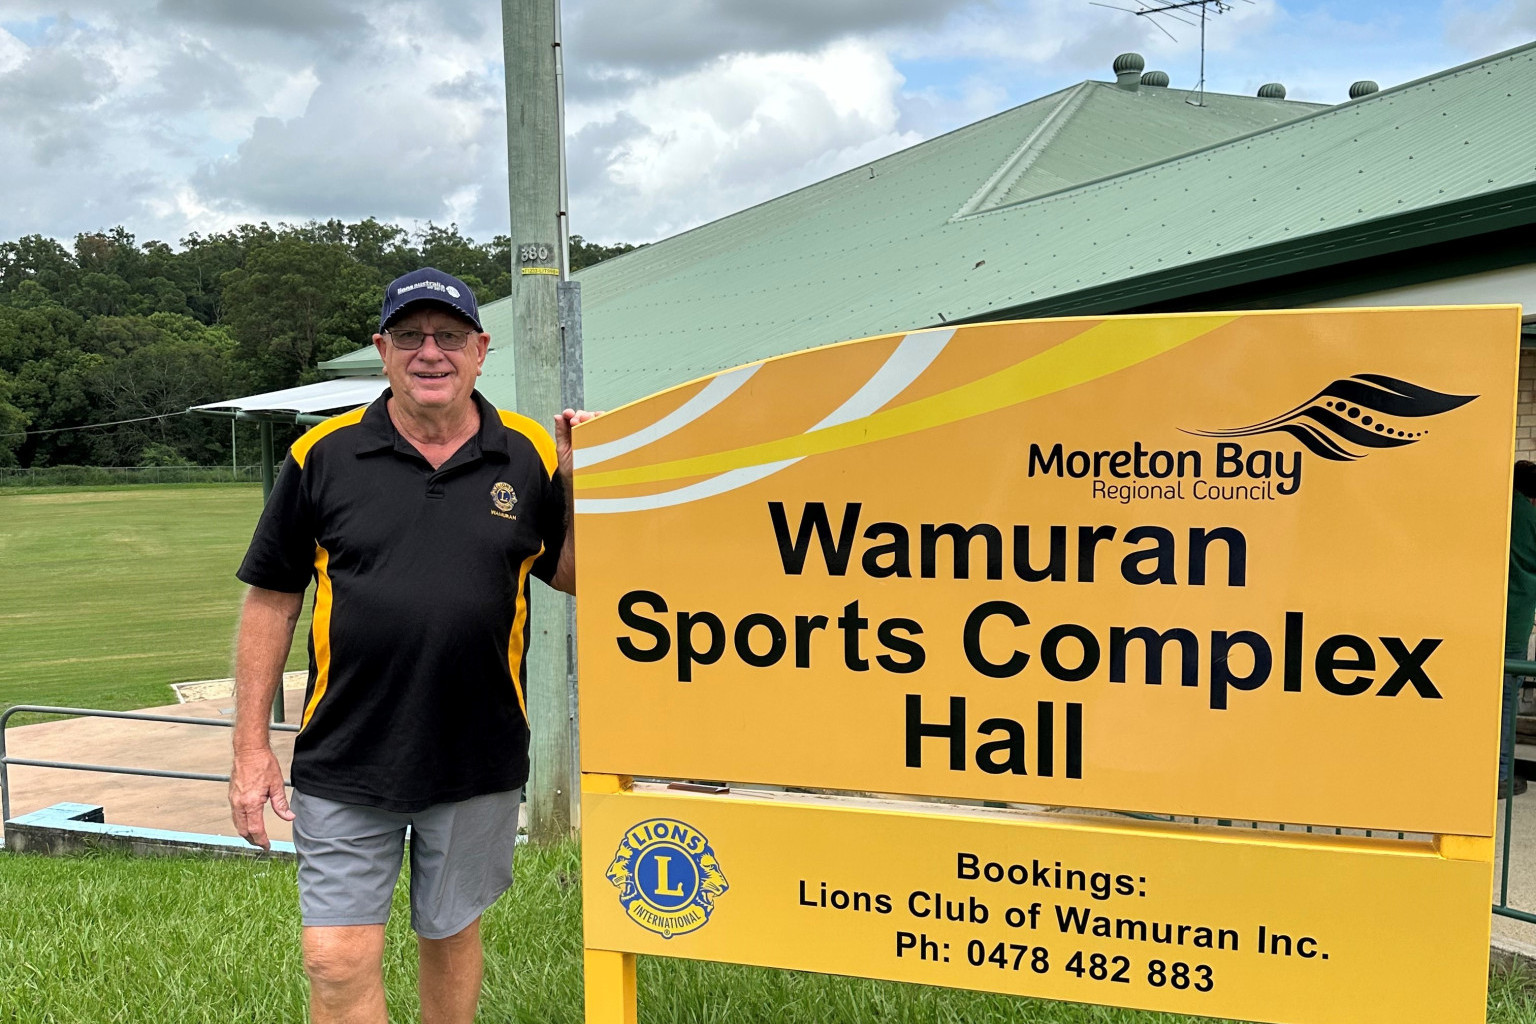 Wamuran Lions Club president Brian McAtee is looking forward to this Friday night’s BBQ event at the Wamuran Sports Complex Hall.